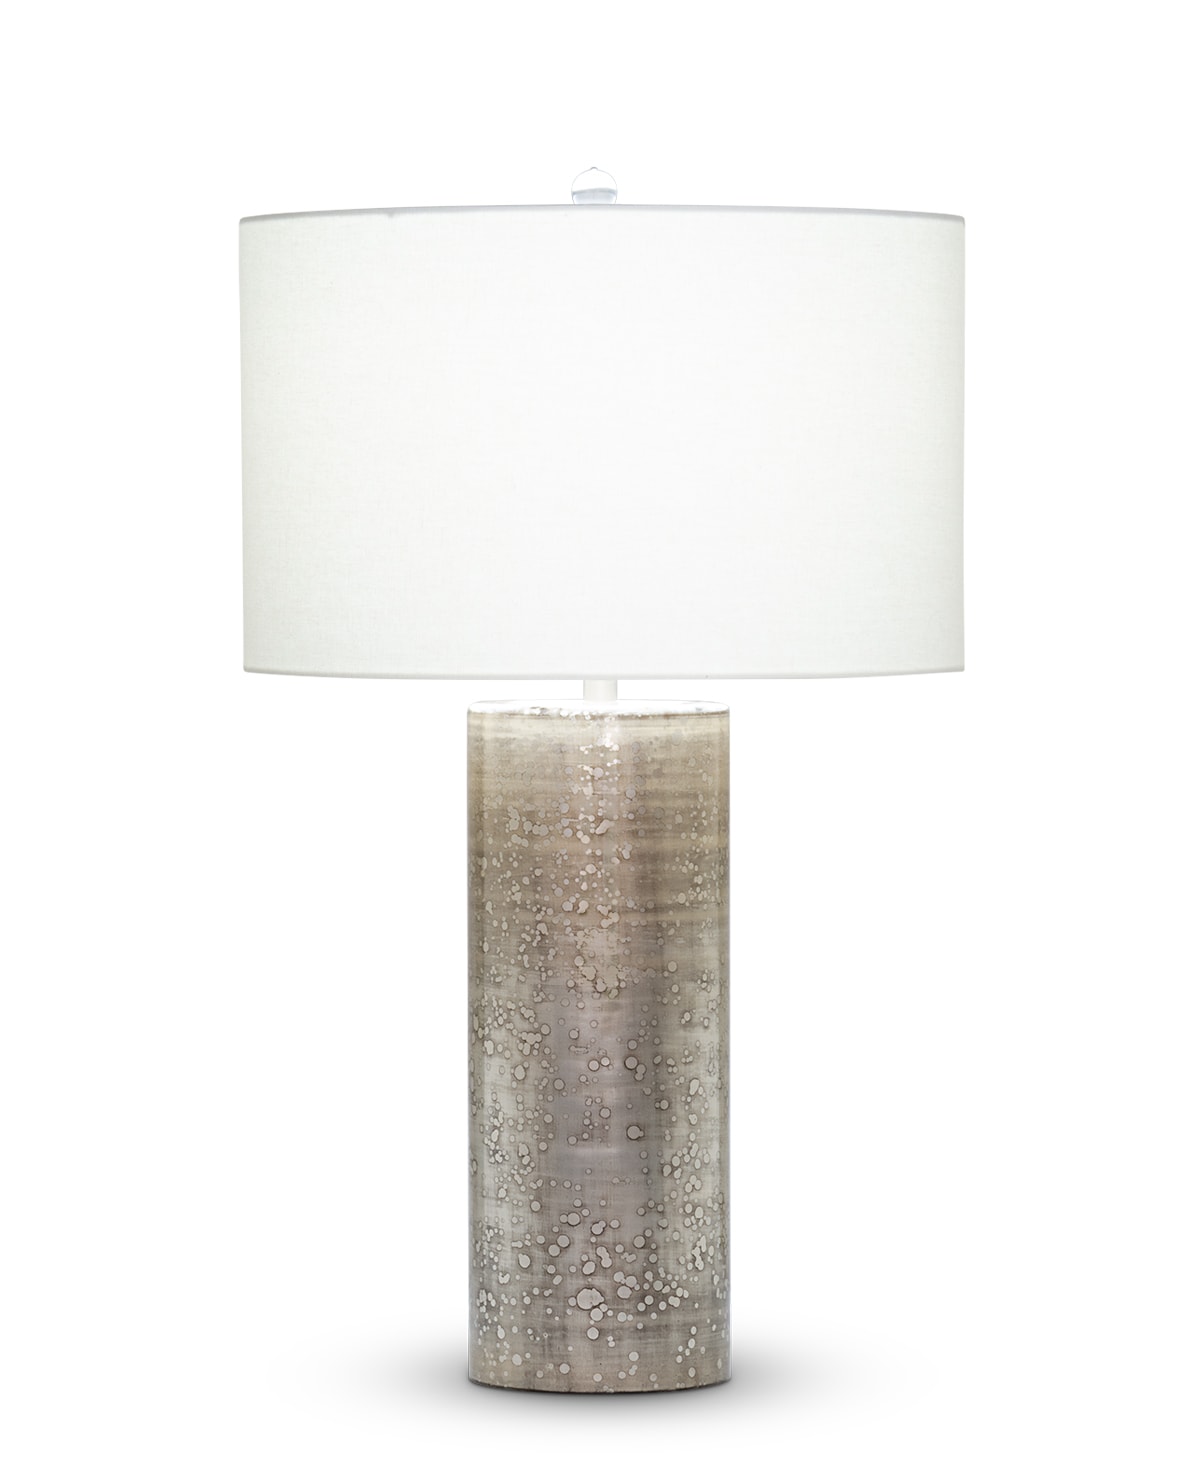 FlowDecor Kelly Table Lamp in mouth-blown glass with dark champagne metallic finish and off-white linen drum shade (# 4512)